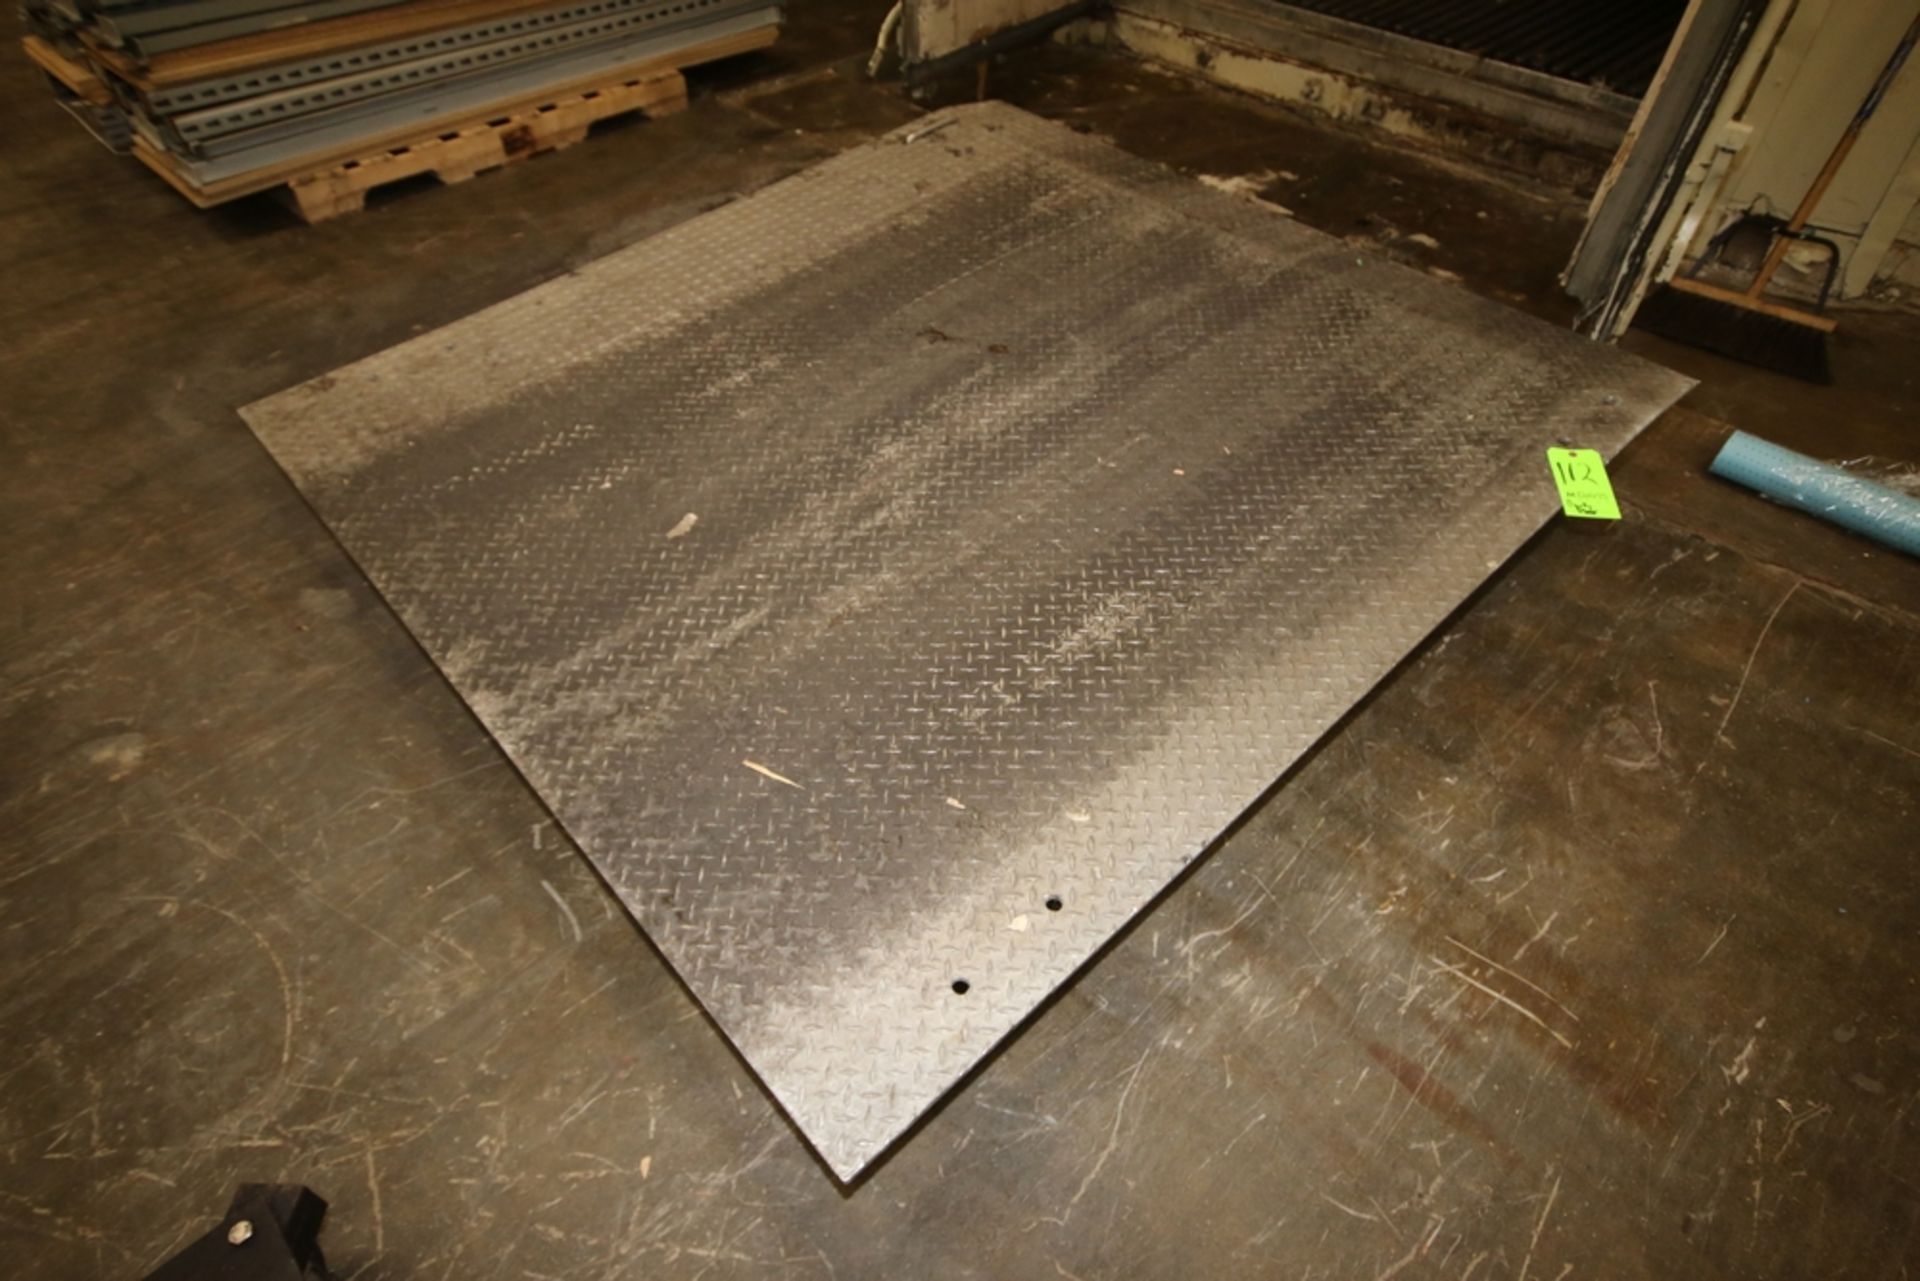 Galvanized Dock Plate, Overall Dims.: Aprox. 75" L x 72" W